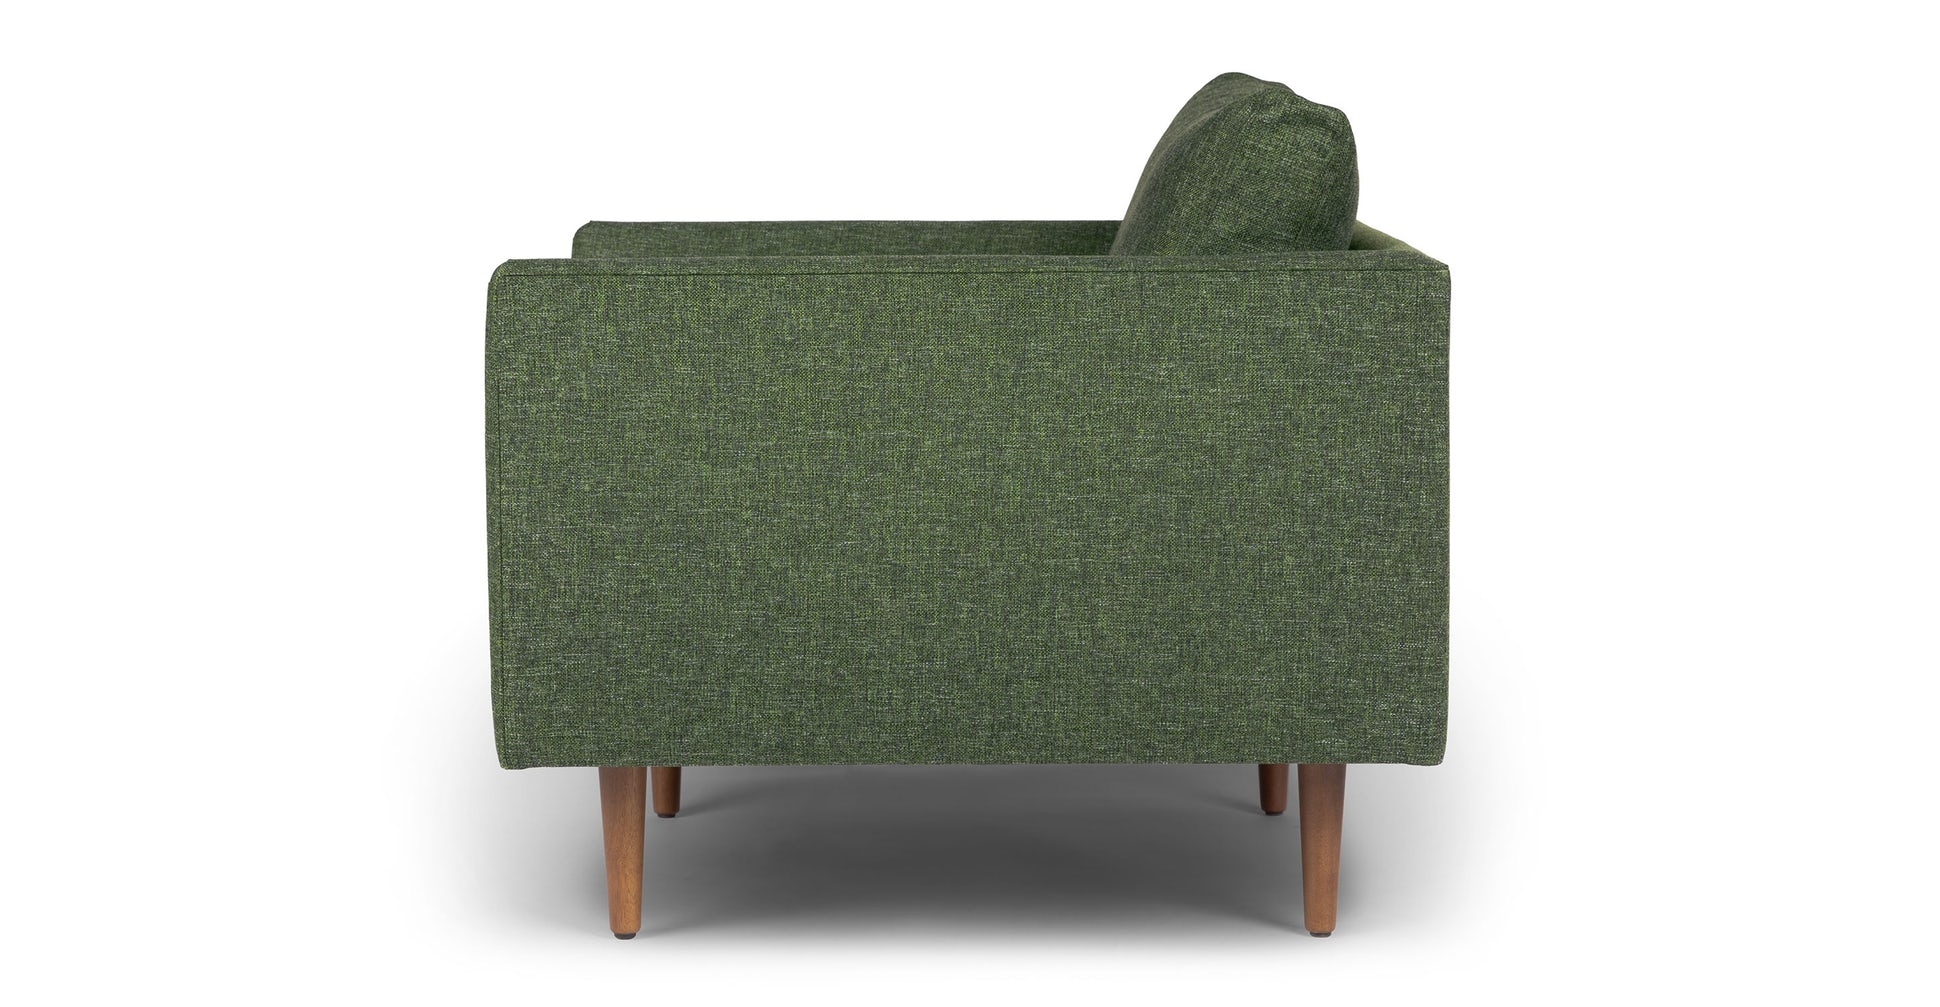 Burrard Forest Green Chair - Image 4